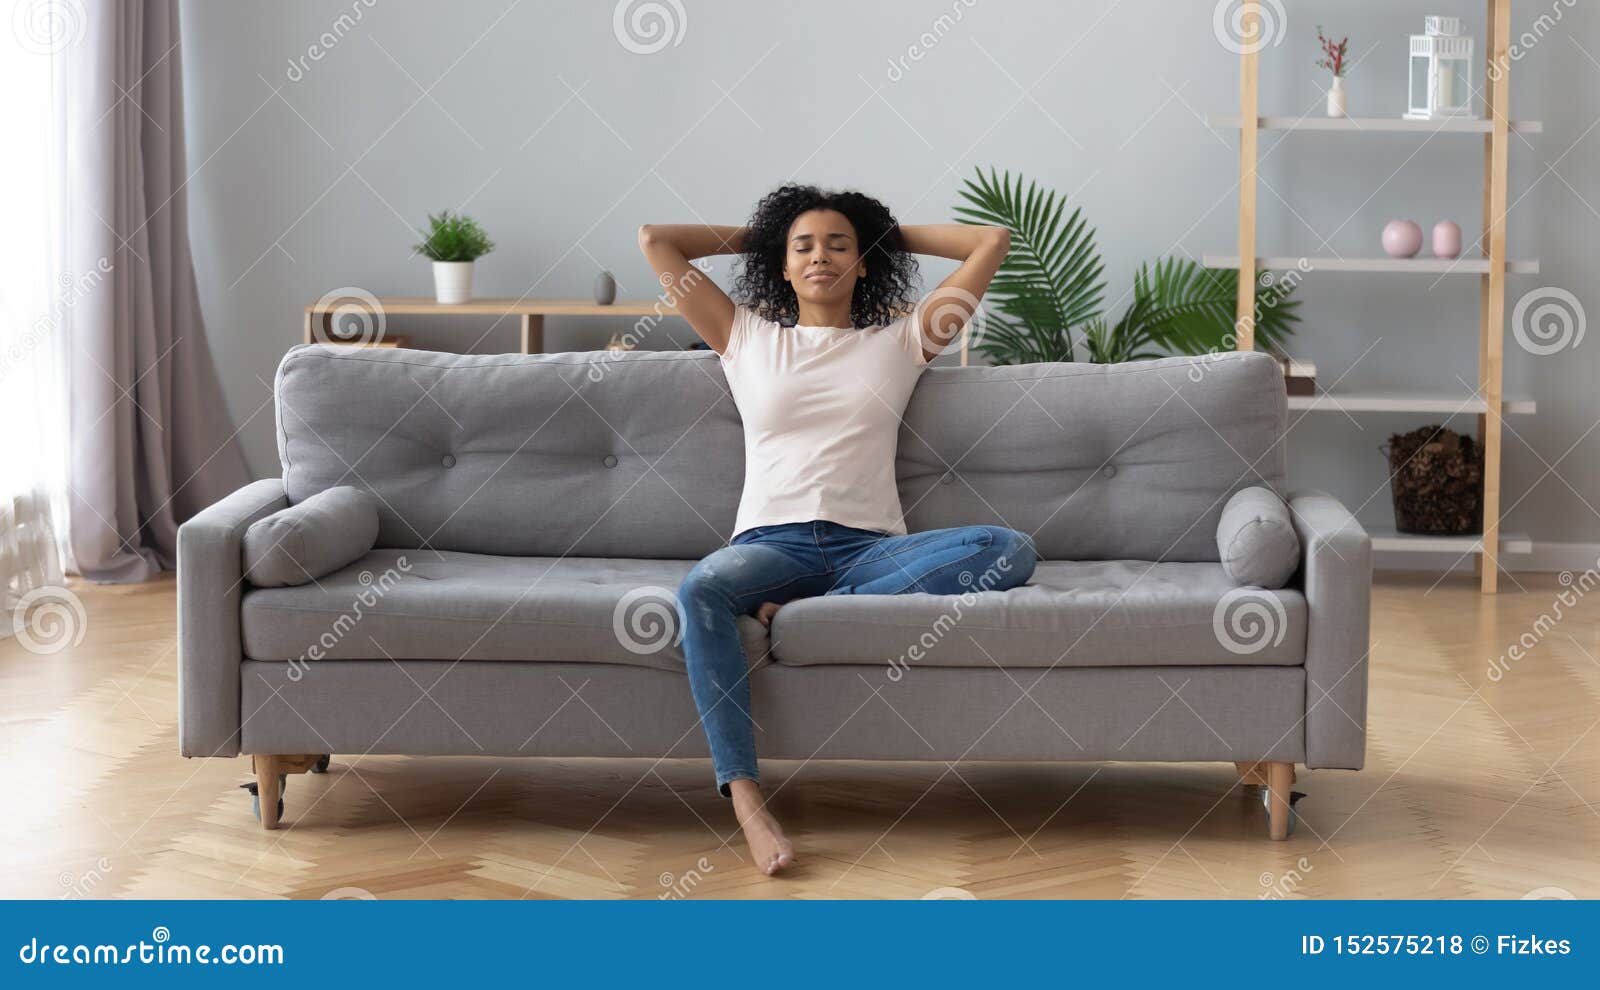 calm black woman relaxing on comfortable sofa in living room